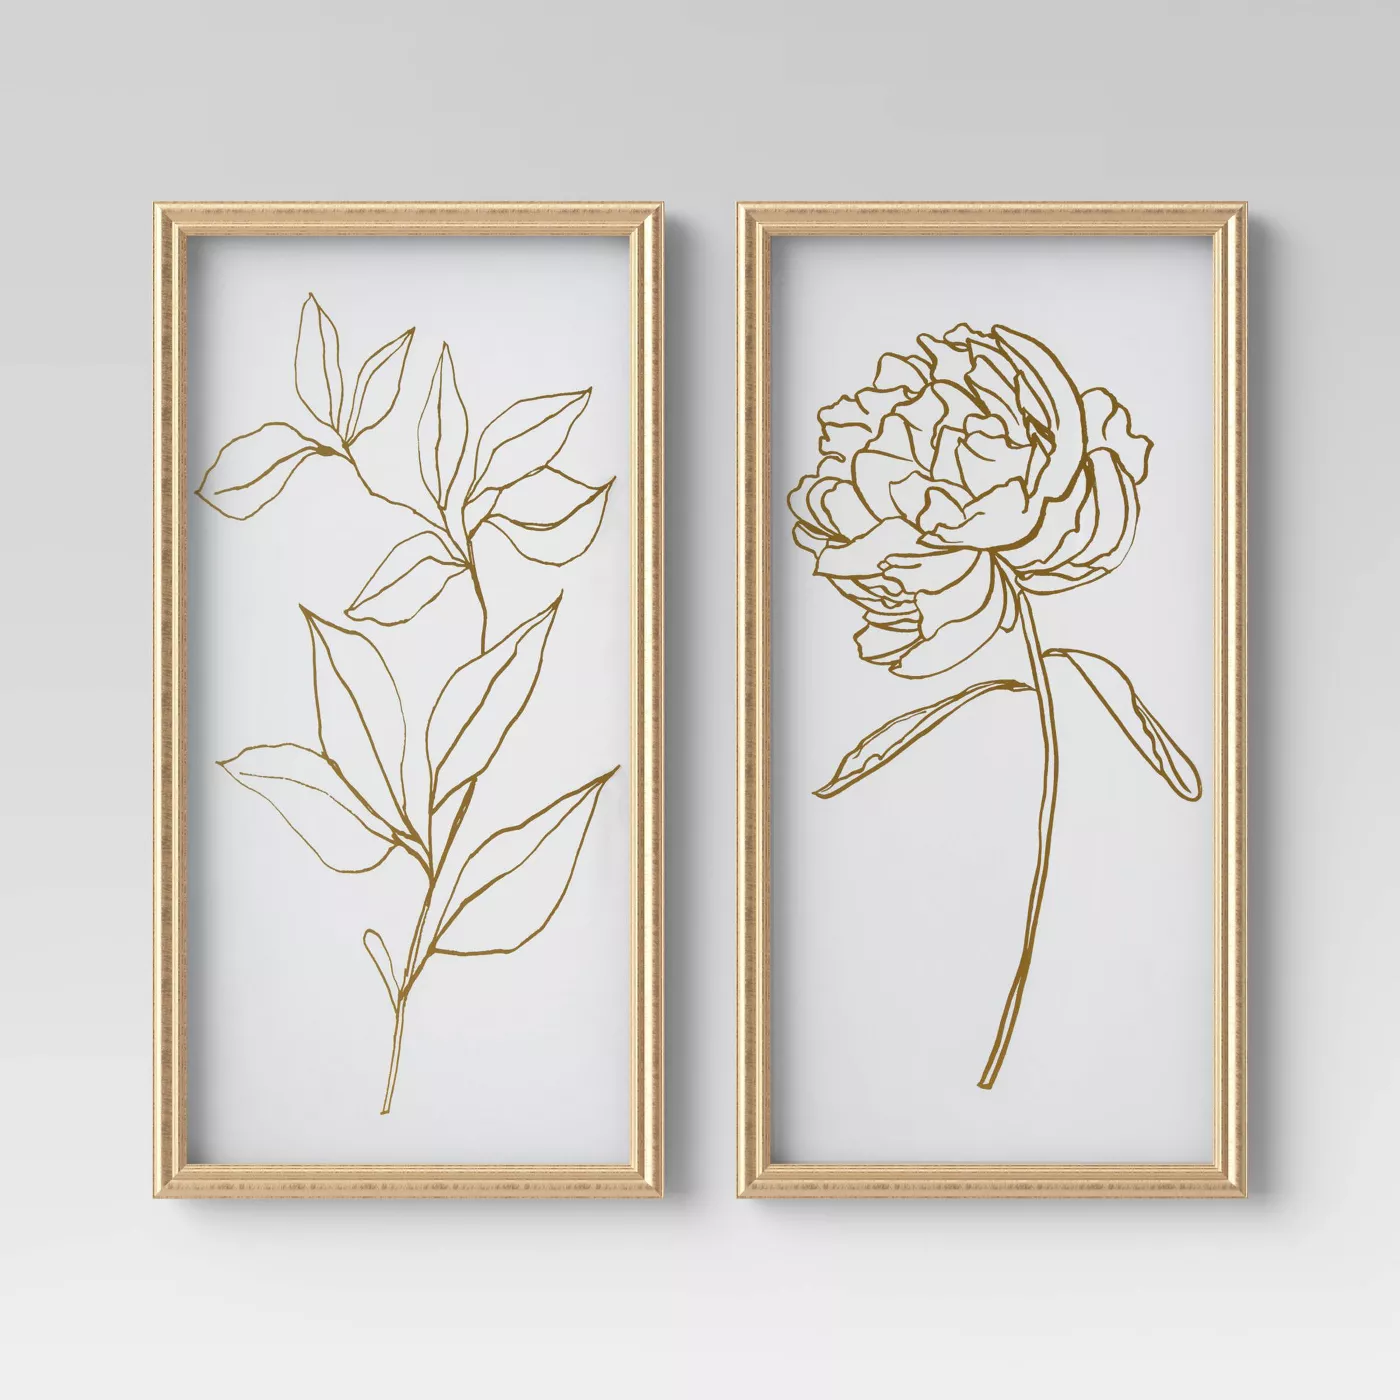 Set of 2 12"x24" Floral Line Drawing Framed Canvas - Opalhouse™ - image 1 of 6